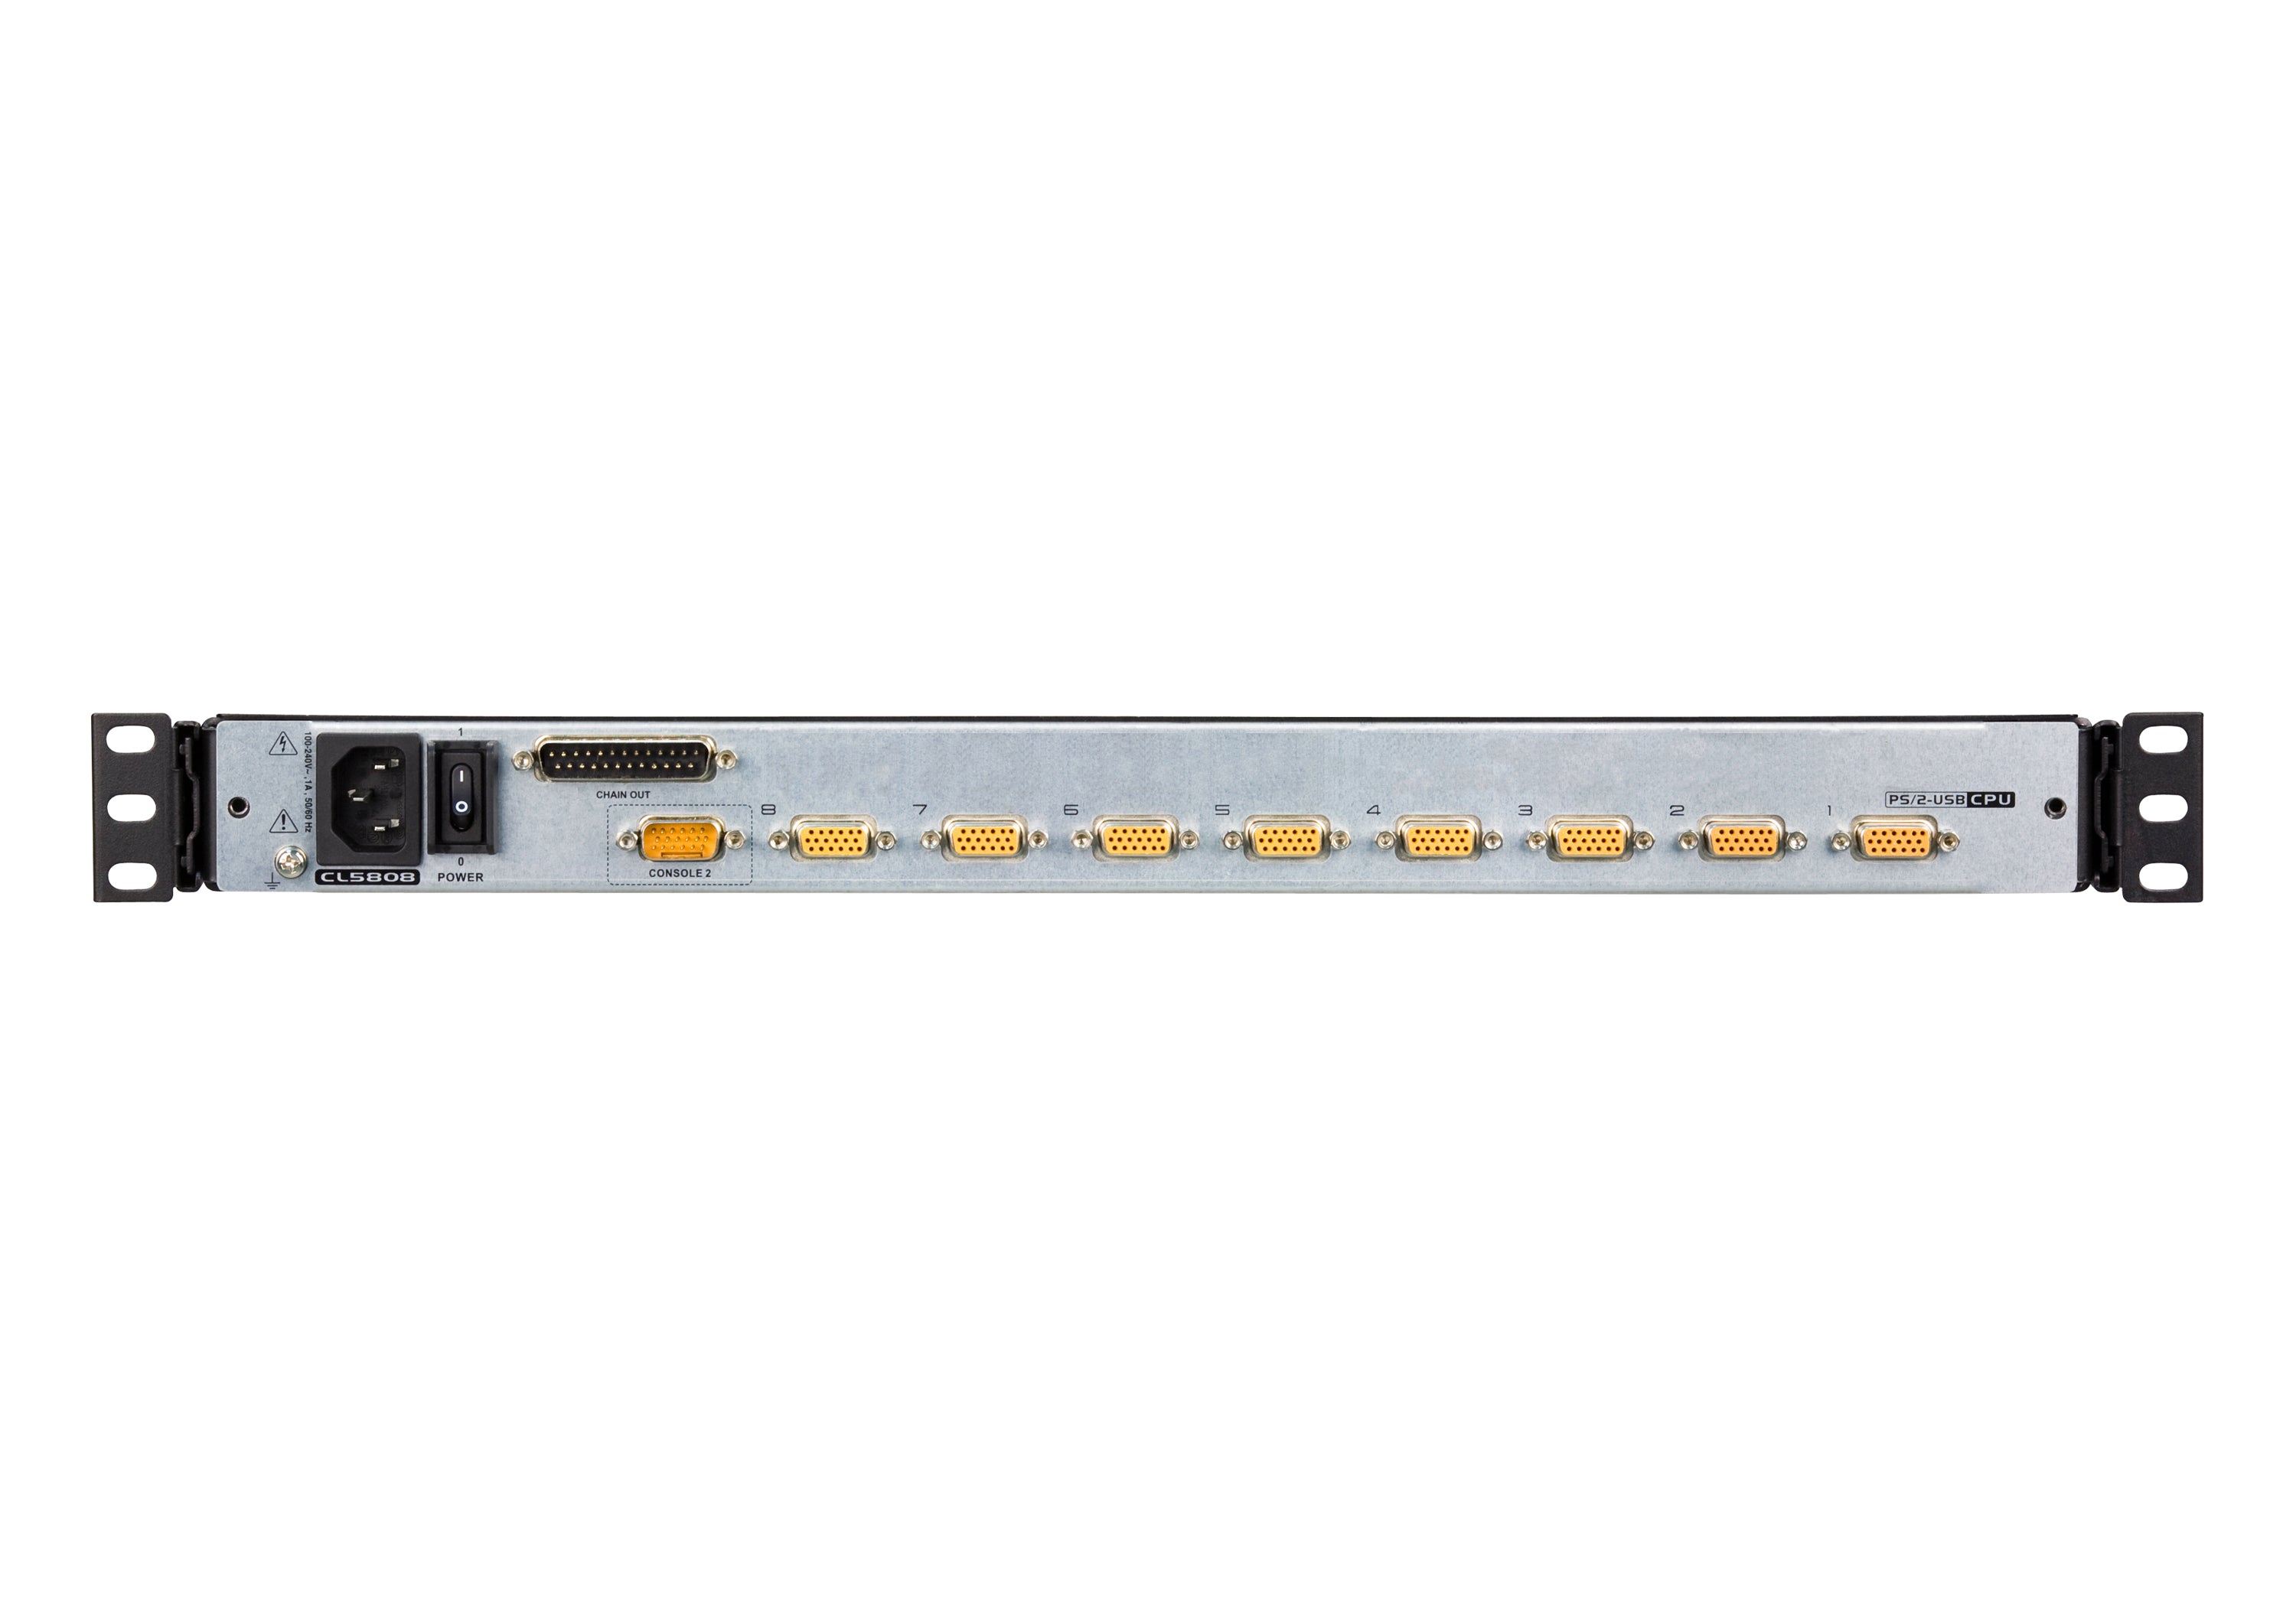 Aten 8-Port PS/2-USB VGA Dual Rail LCD KVM Switch- CL5808N (1 Year Manufacture Local Warranty In Singapore)